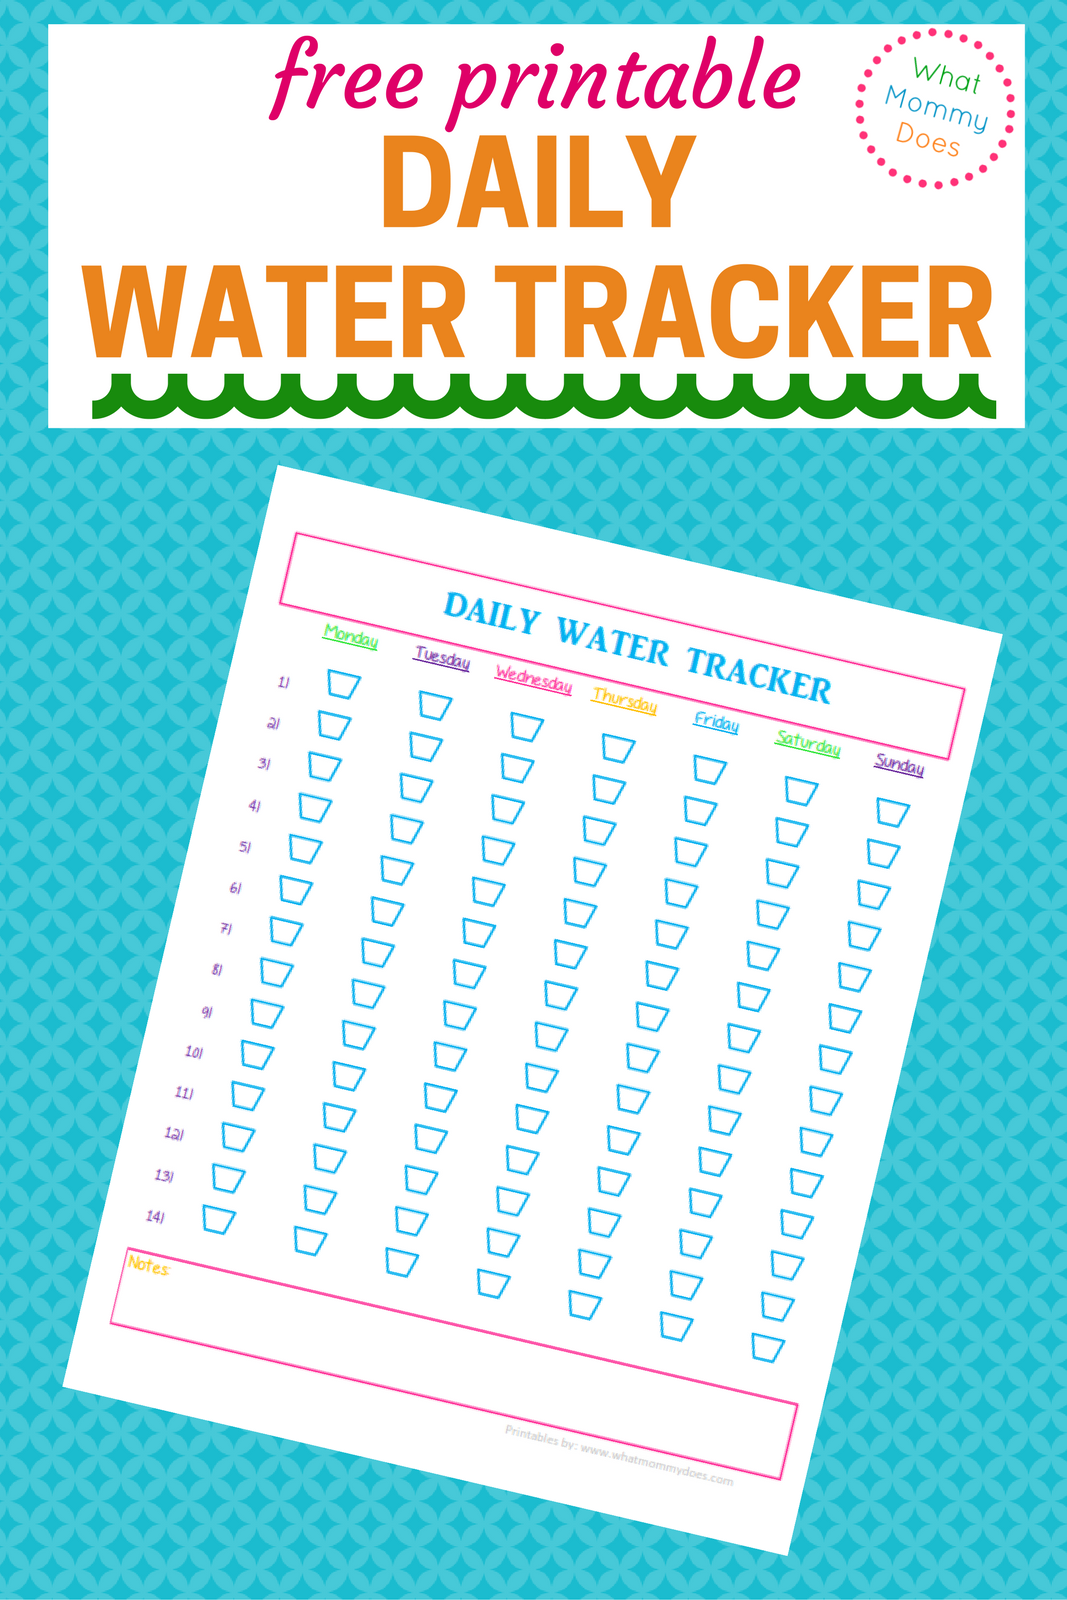 free-daily-water-tracker-printable-what-mommy-does